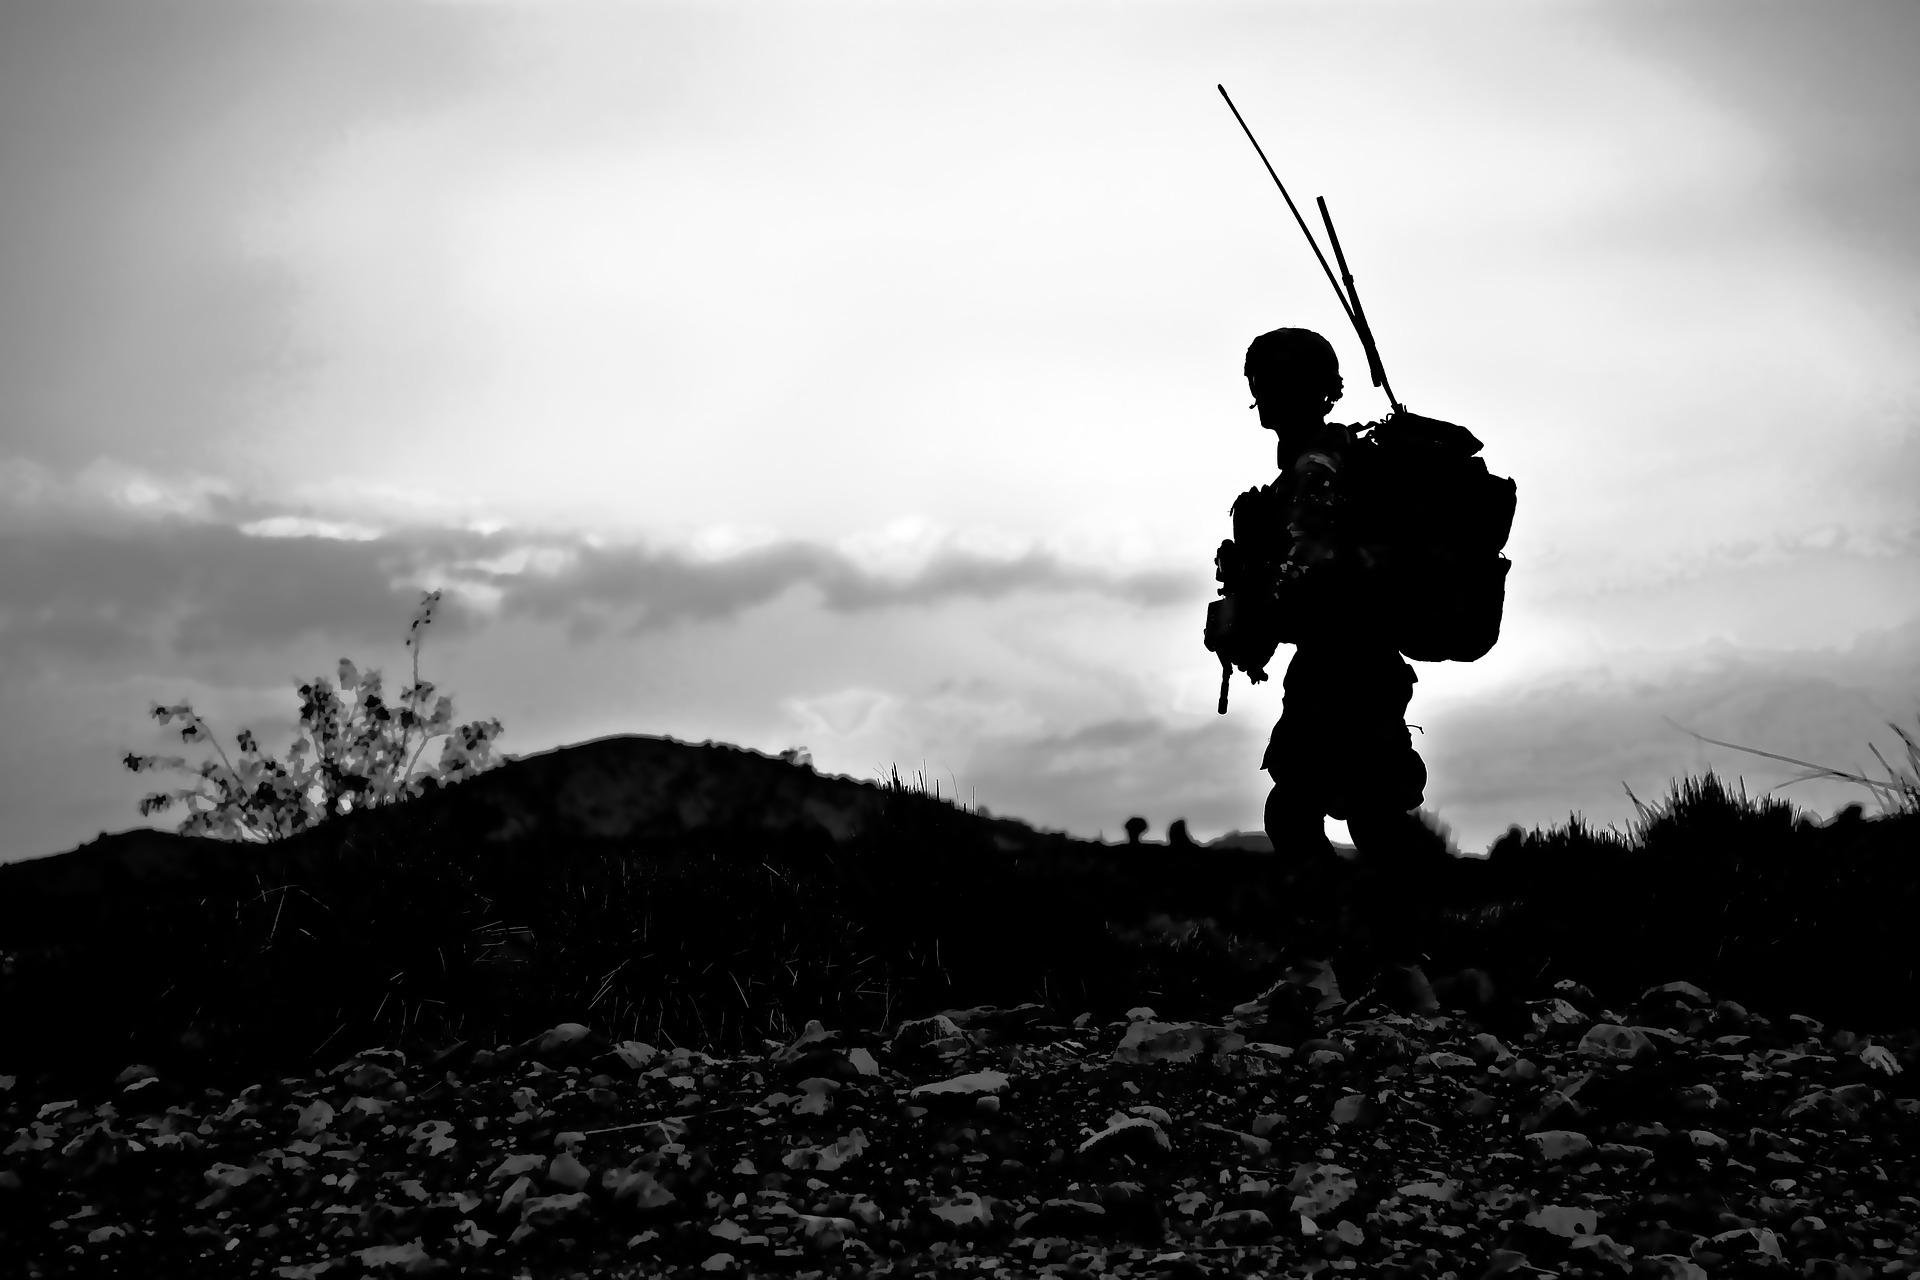 black & white pic of soldier carrying communications equipment with twin aerials silhoutted against bright sky and rocky, hilly landscape with a small scrub. Image by Amber Clay from Pixabay https://pixabay.com/photos/soldier-military-uniform-armed-60762/